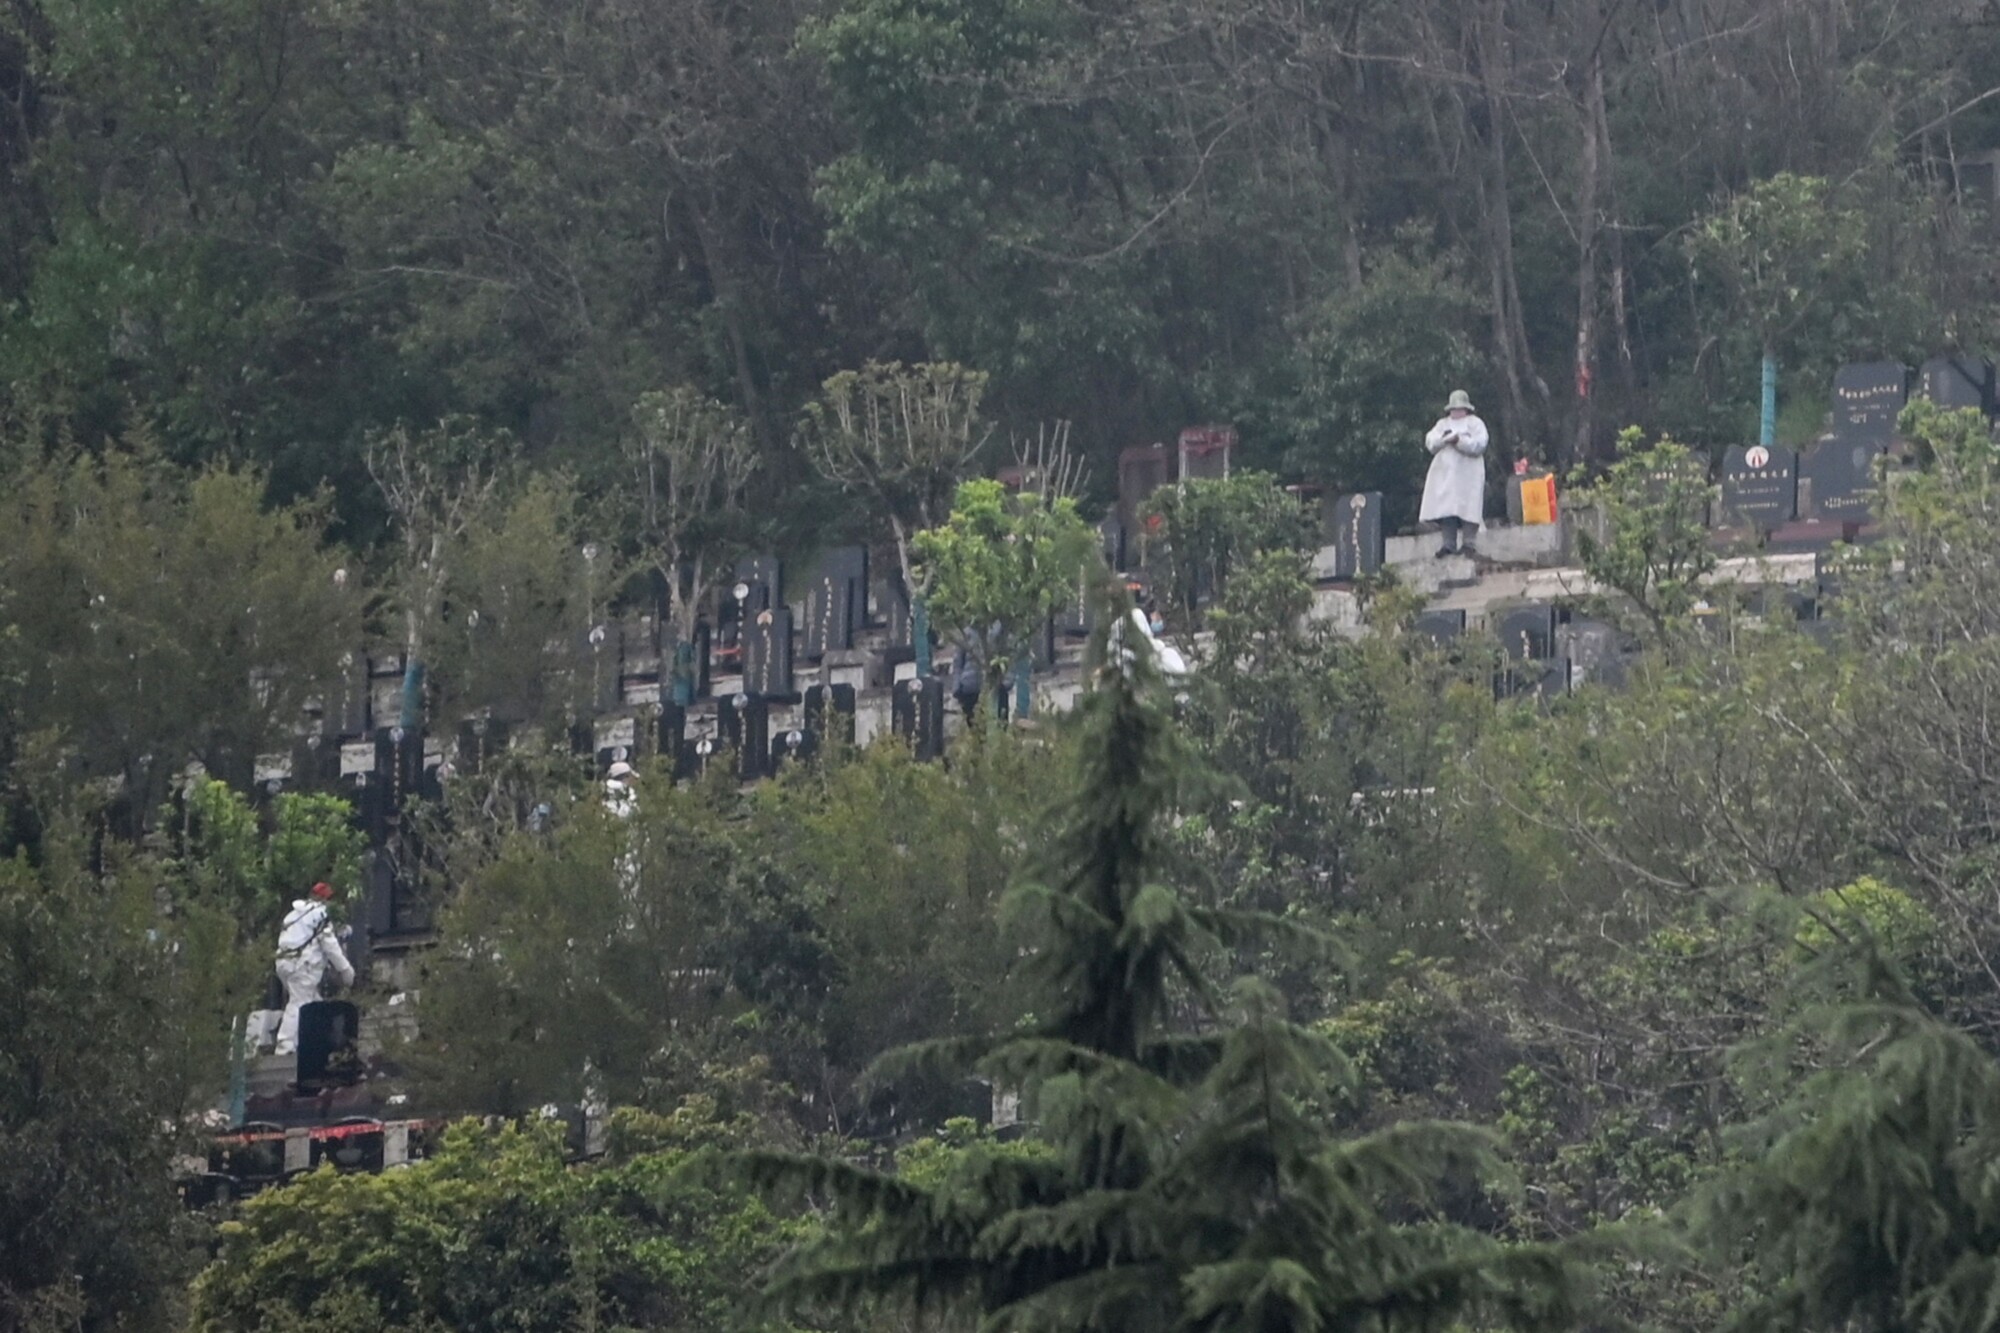 Large Crowds Gather at Wuhan Cemeteries in China